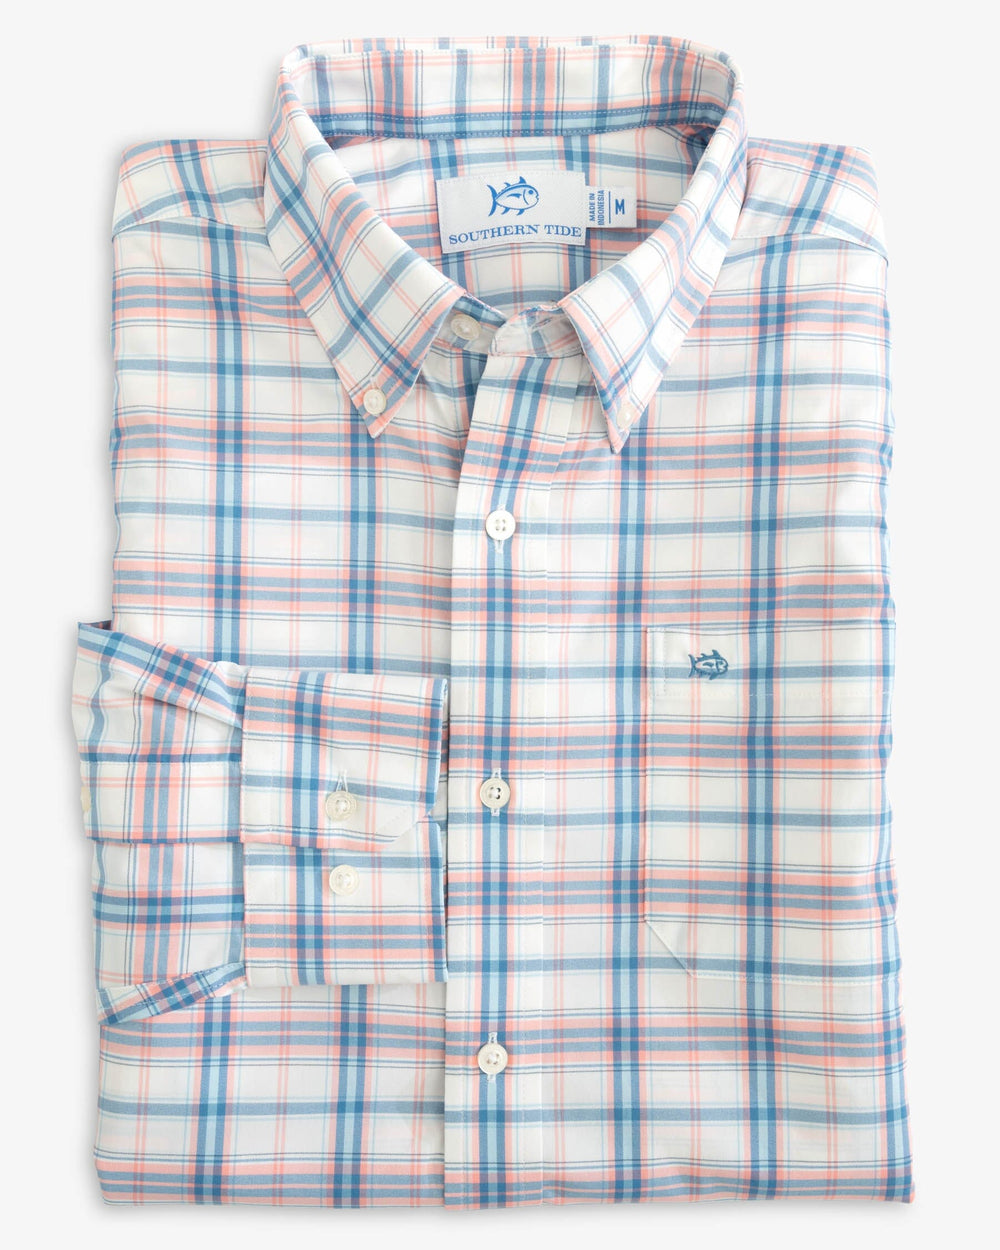 The folded view of the Southern Tide Sapelo Plaid Intercoastal Sport Shirt by Southern Tide - Flamingo Pink